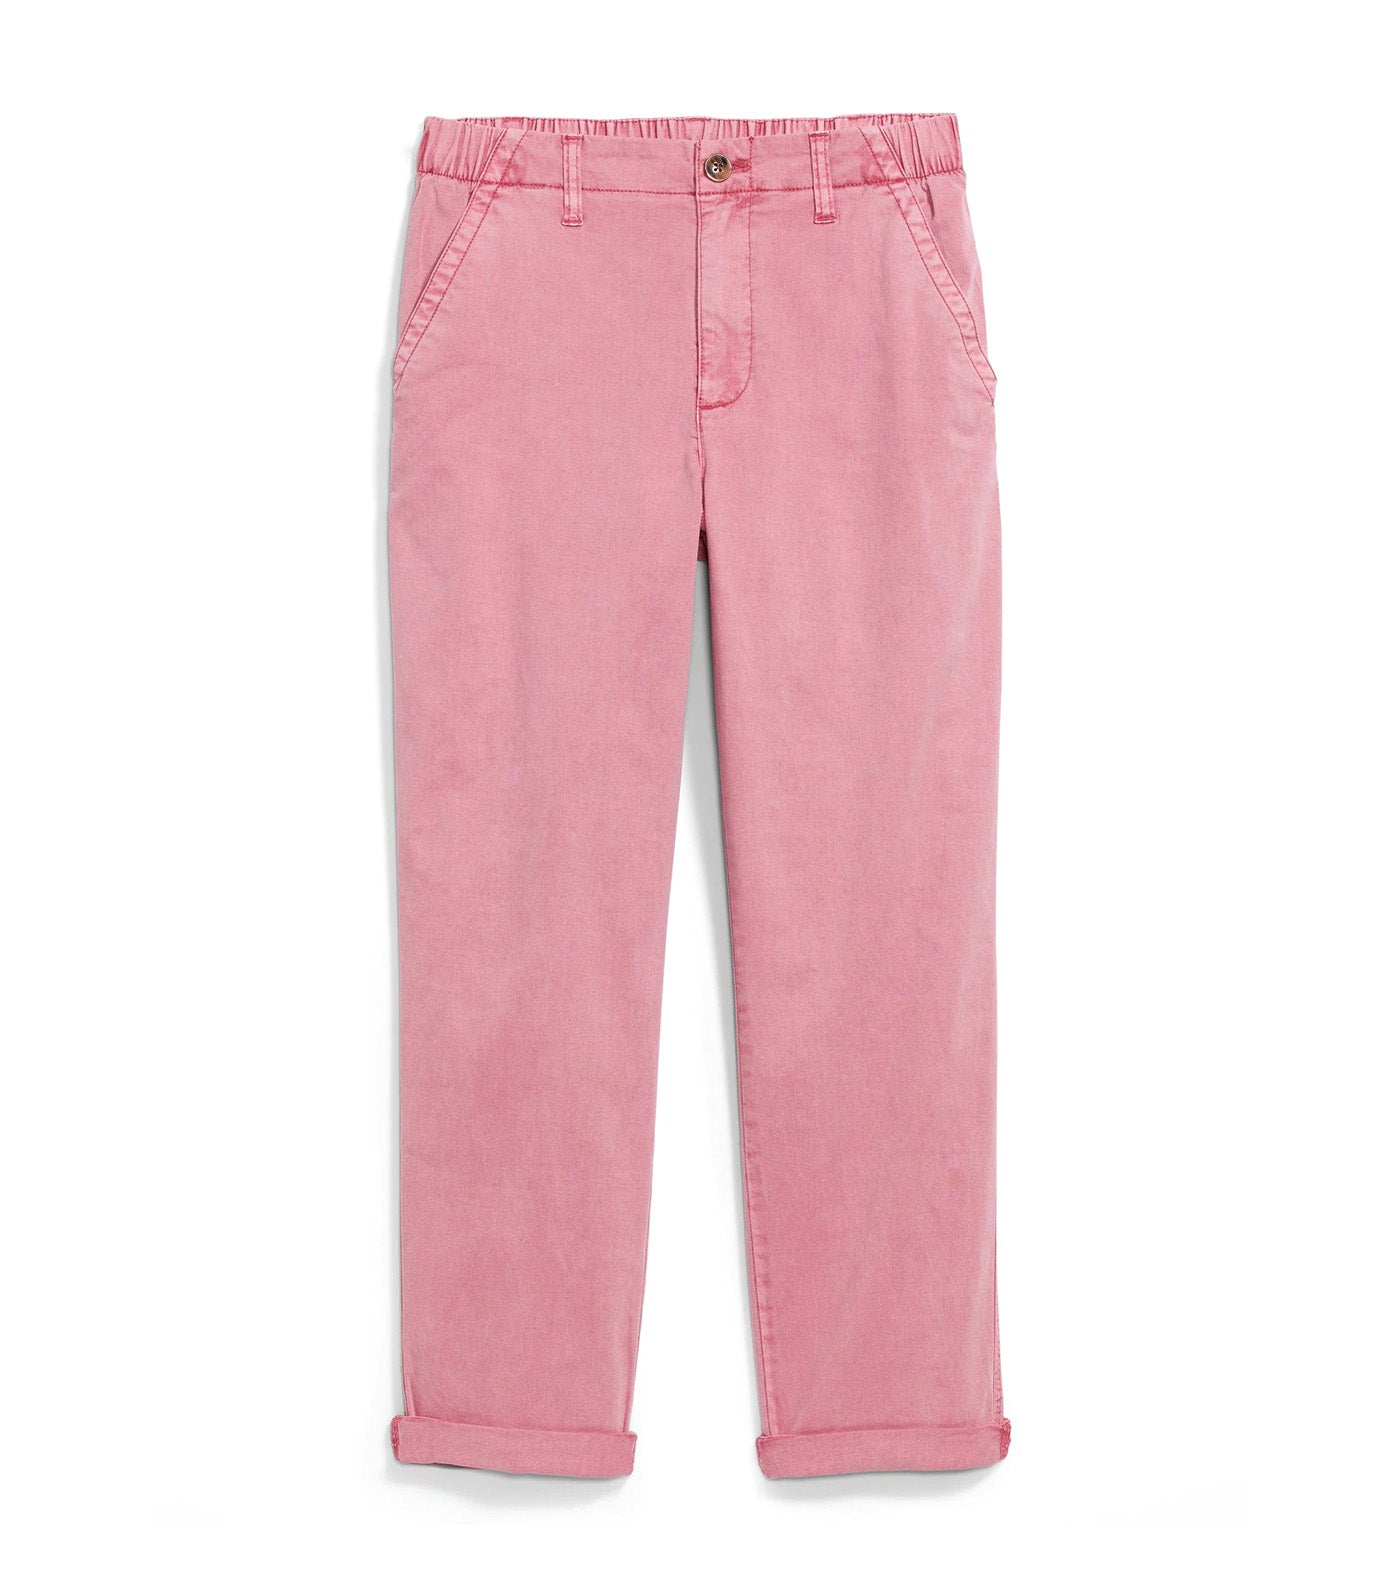 High-Waisted OGC Chino Pants for Women Rose Cloud